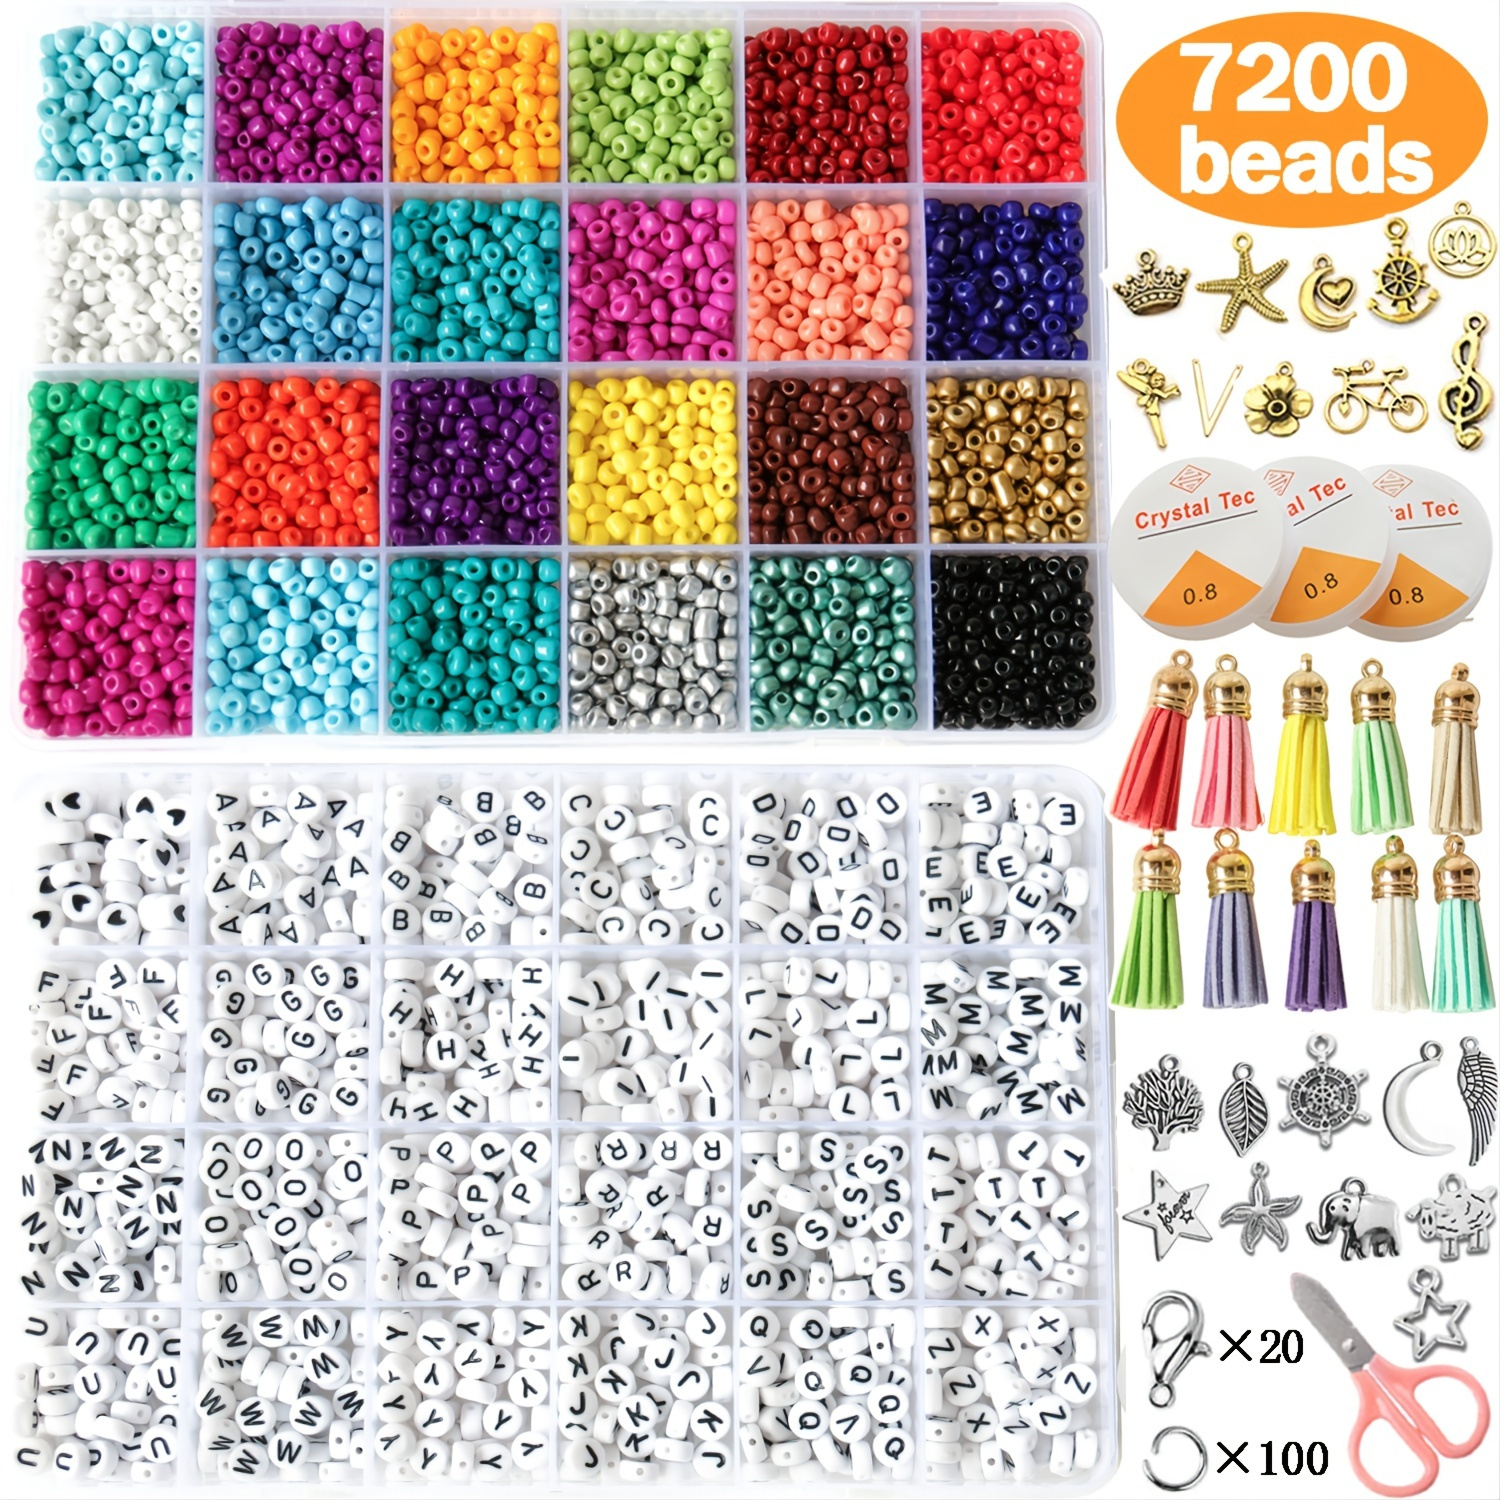 10800pcs 3mm Glass Seed Beads And 1200pcs Letter Beads For Friendship  Bracelets Jewelry Making, Necklaces And Key Chains Craft Beads Kit With 2  Rolls